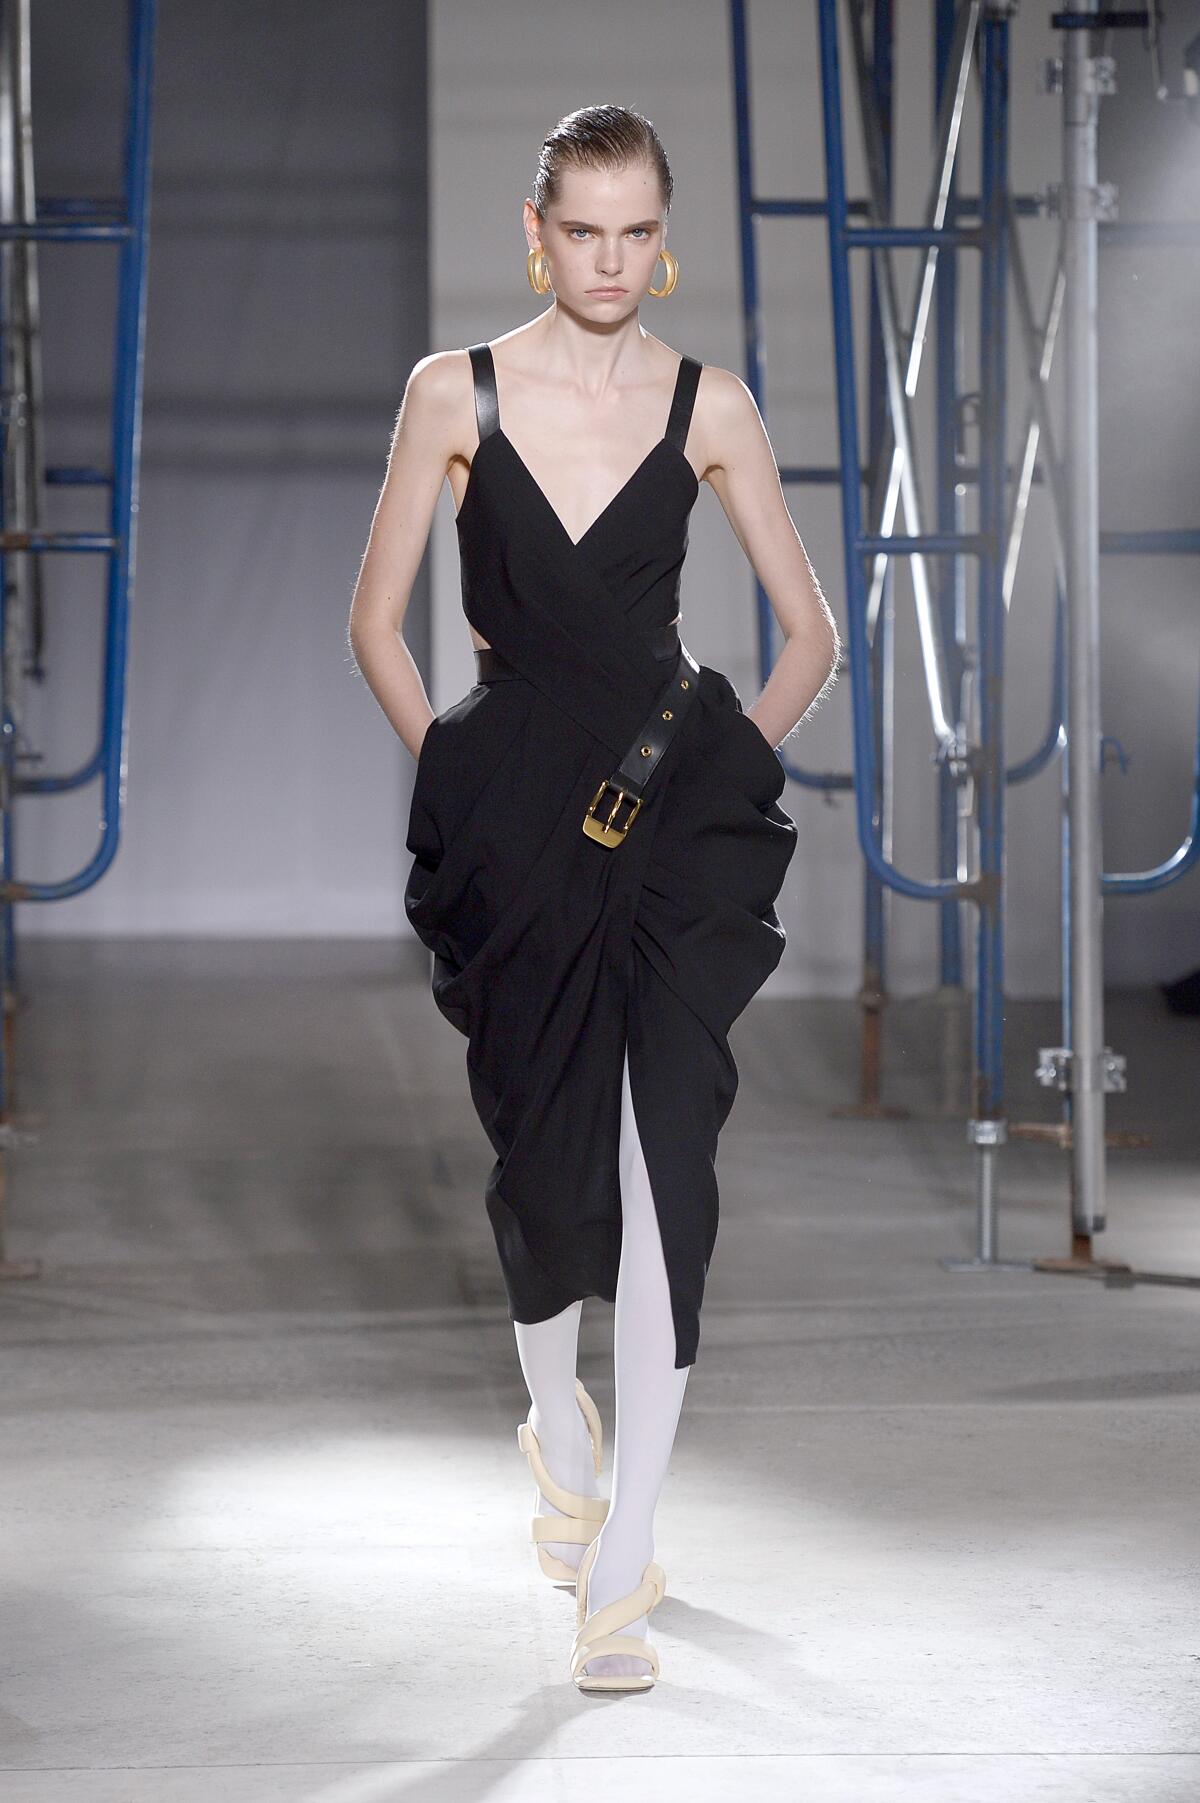 A look from the spring and summer 2020 Proenza Schouler runway collection